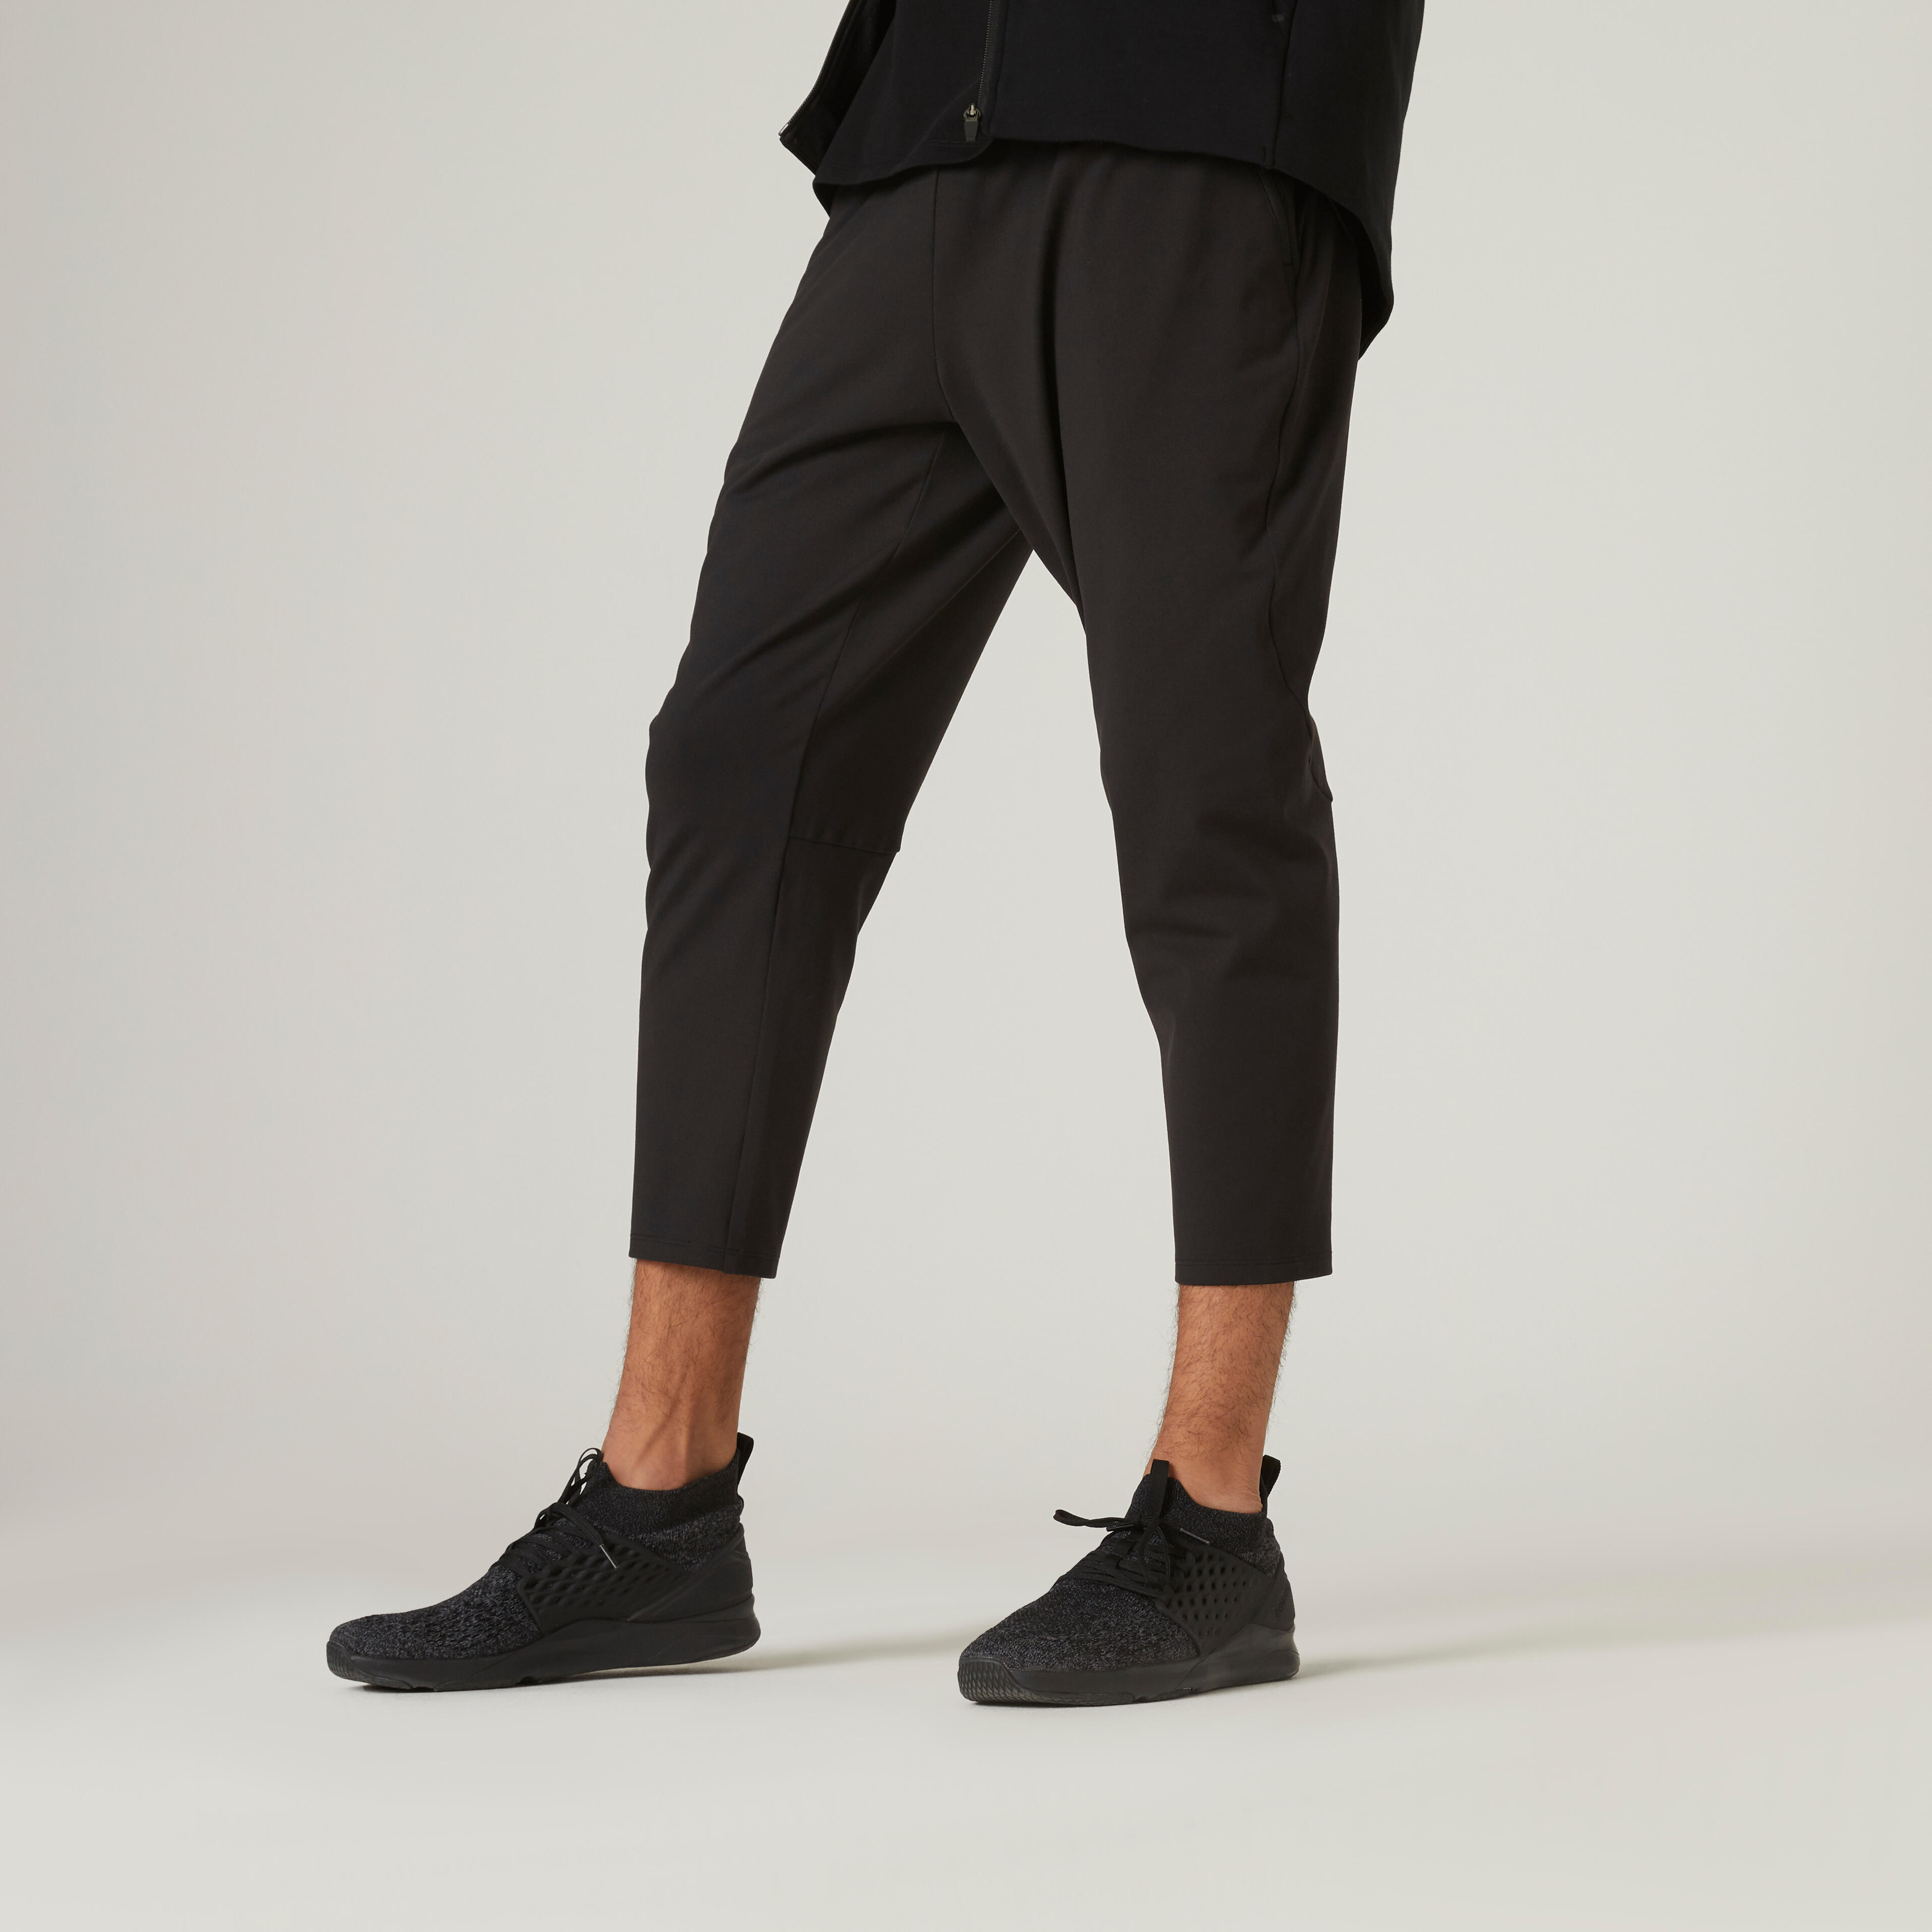 Buy Nike DriFIT Woven Team Training Pants from the Next UK online shop